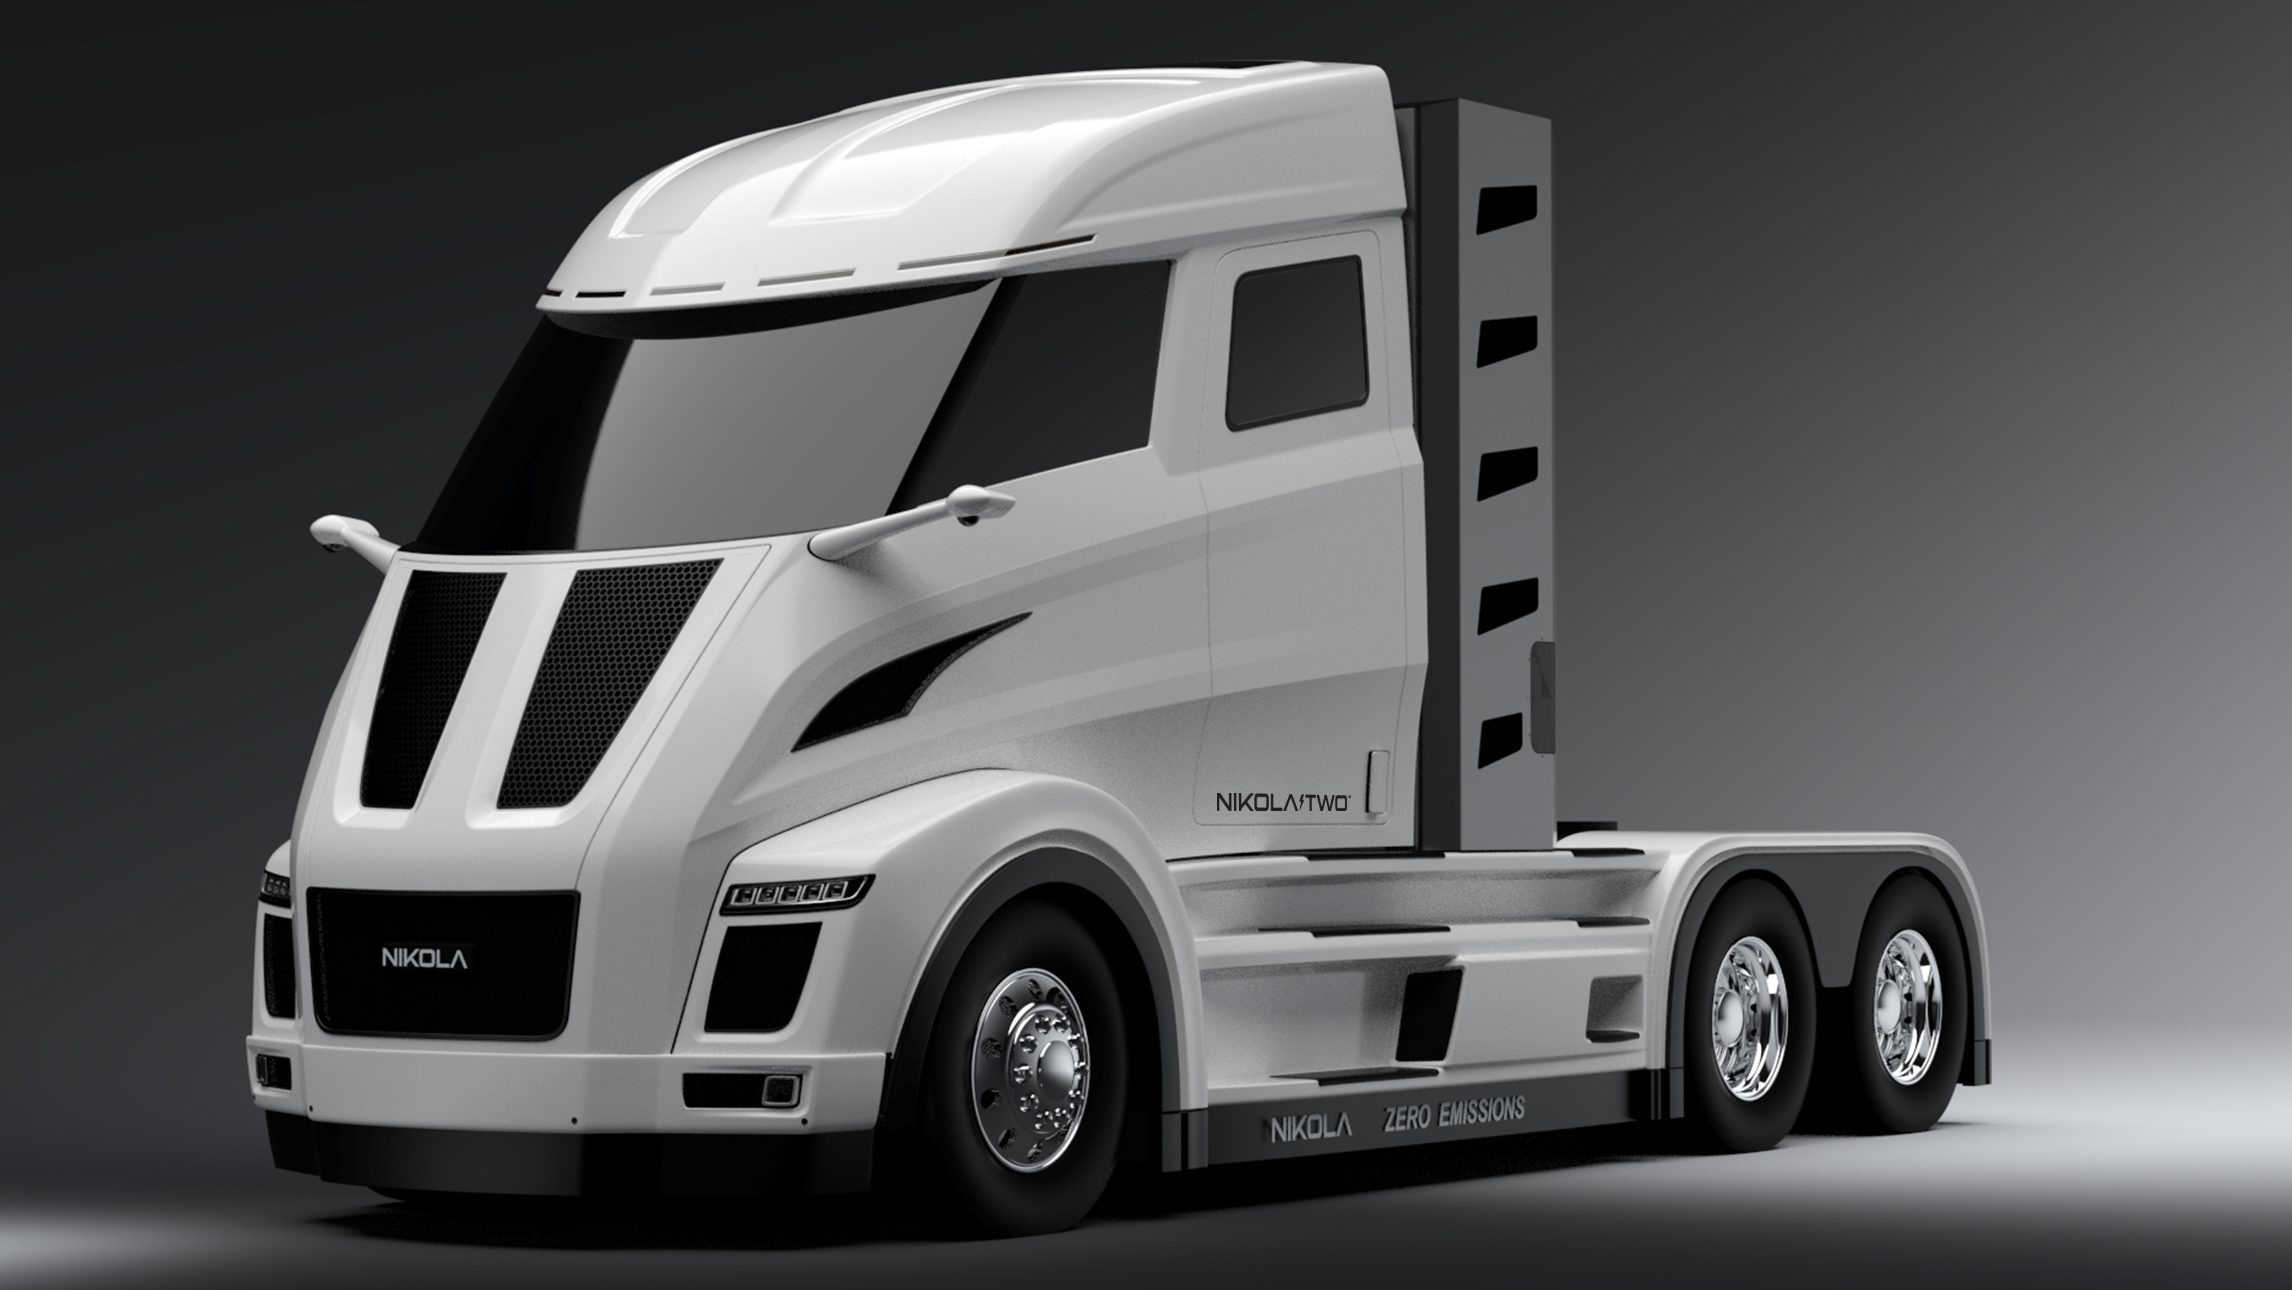 The powertrain for the electric long-haul truck